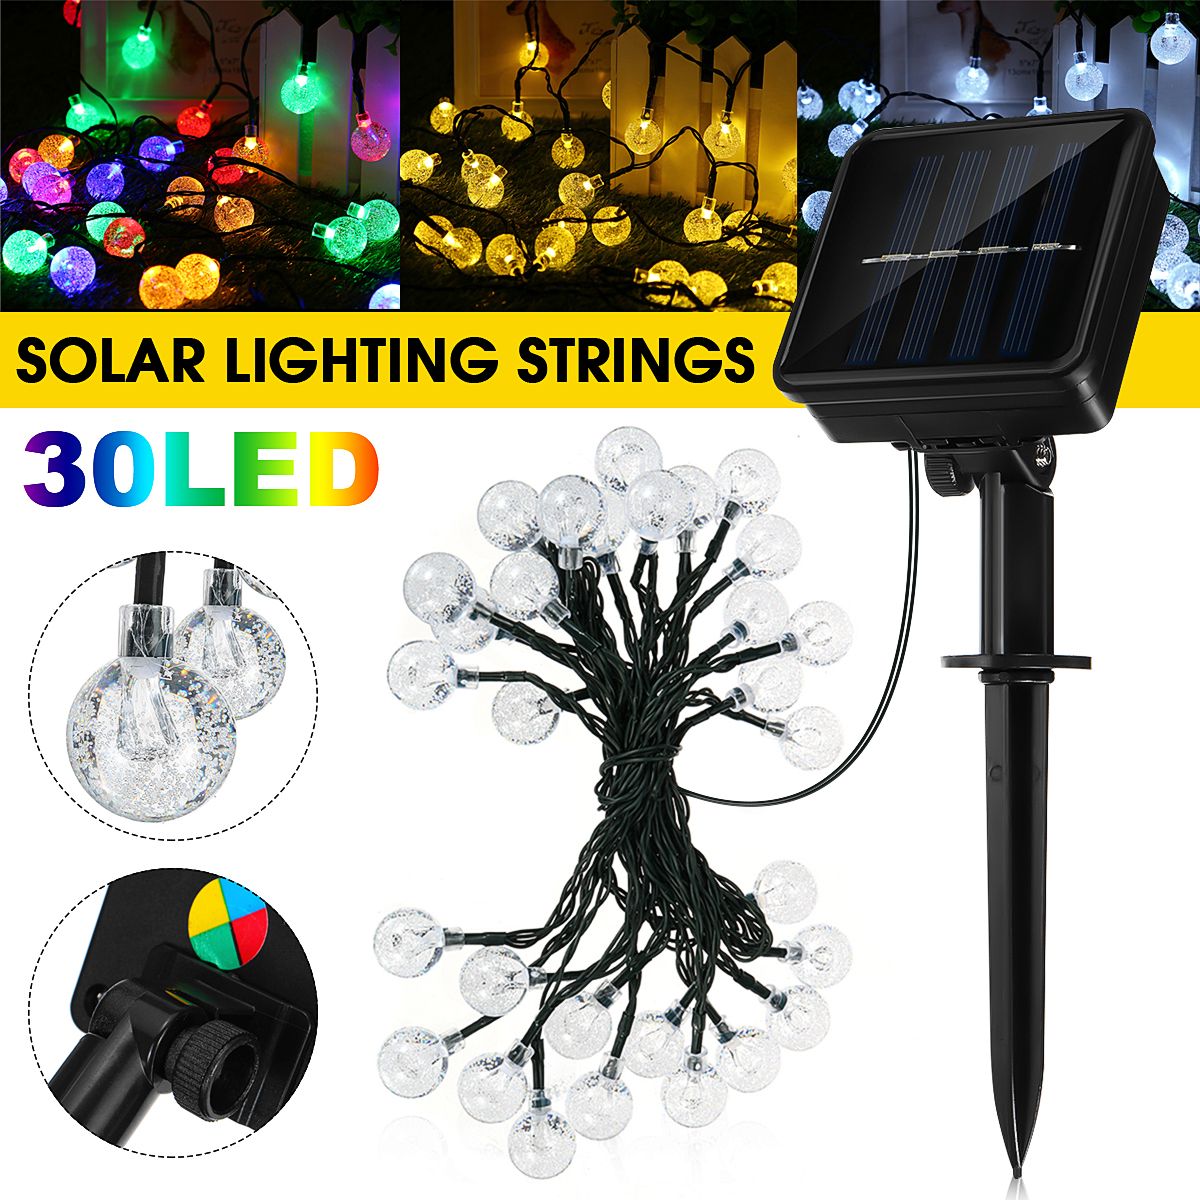 48M65M7M-2-Modes-203050LED-Solar-String-Light-Outdoor-Lawn-Lamp-Christmas-Decorations-Clearance-Chri-1754459